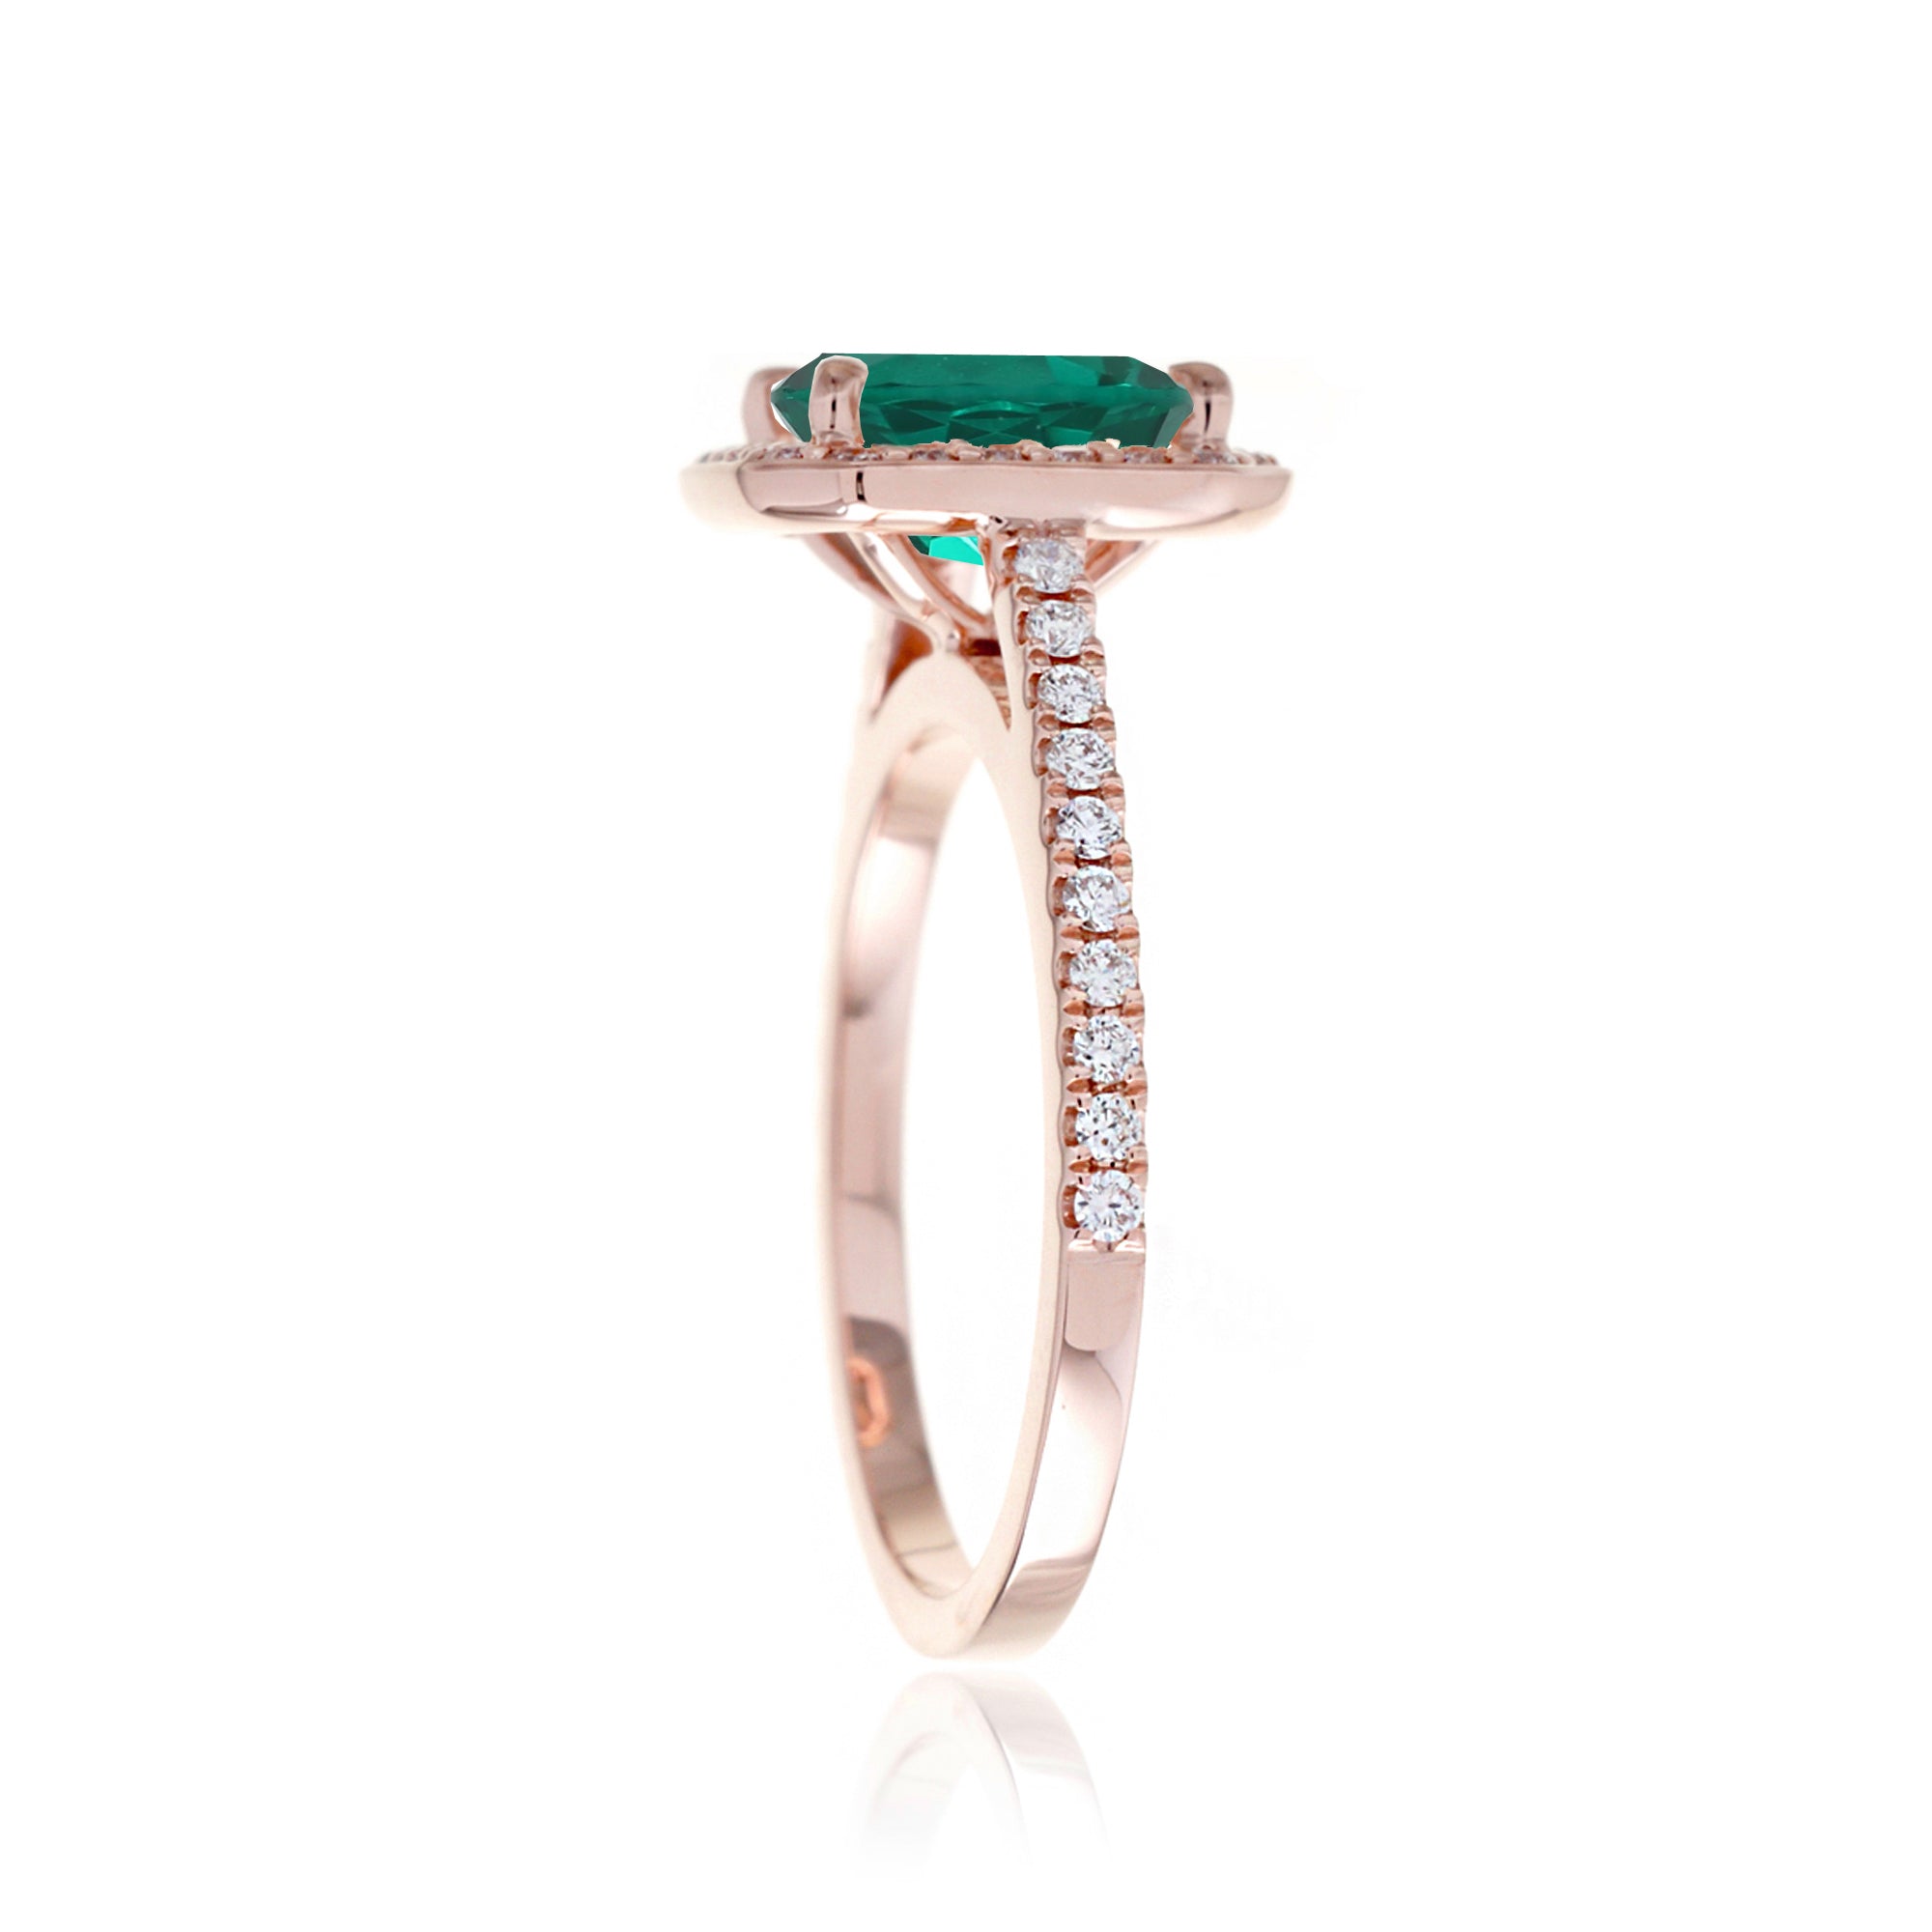 Cushion lab-grown emerald diamond halo cathedral engagement ring - the Steffy rose gold